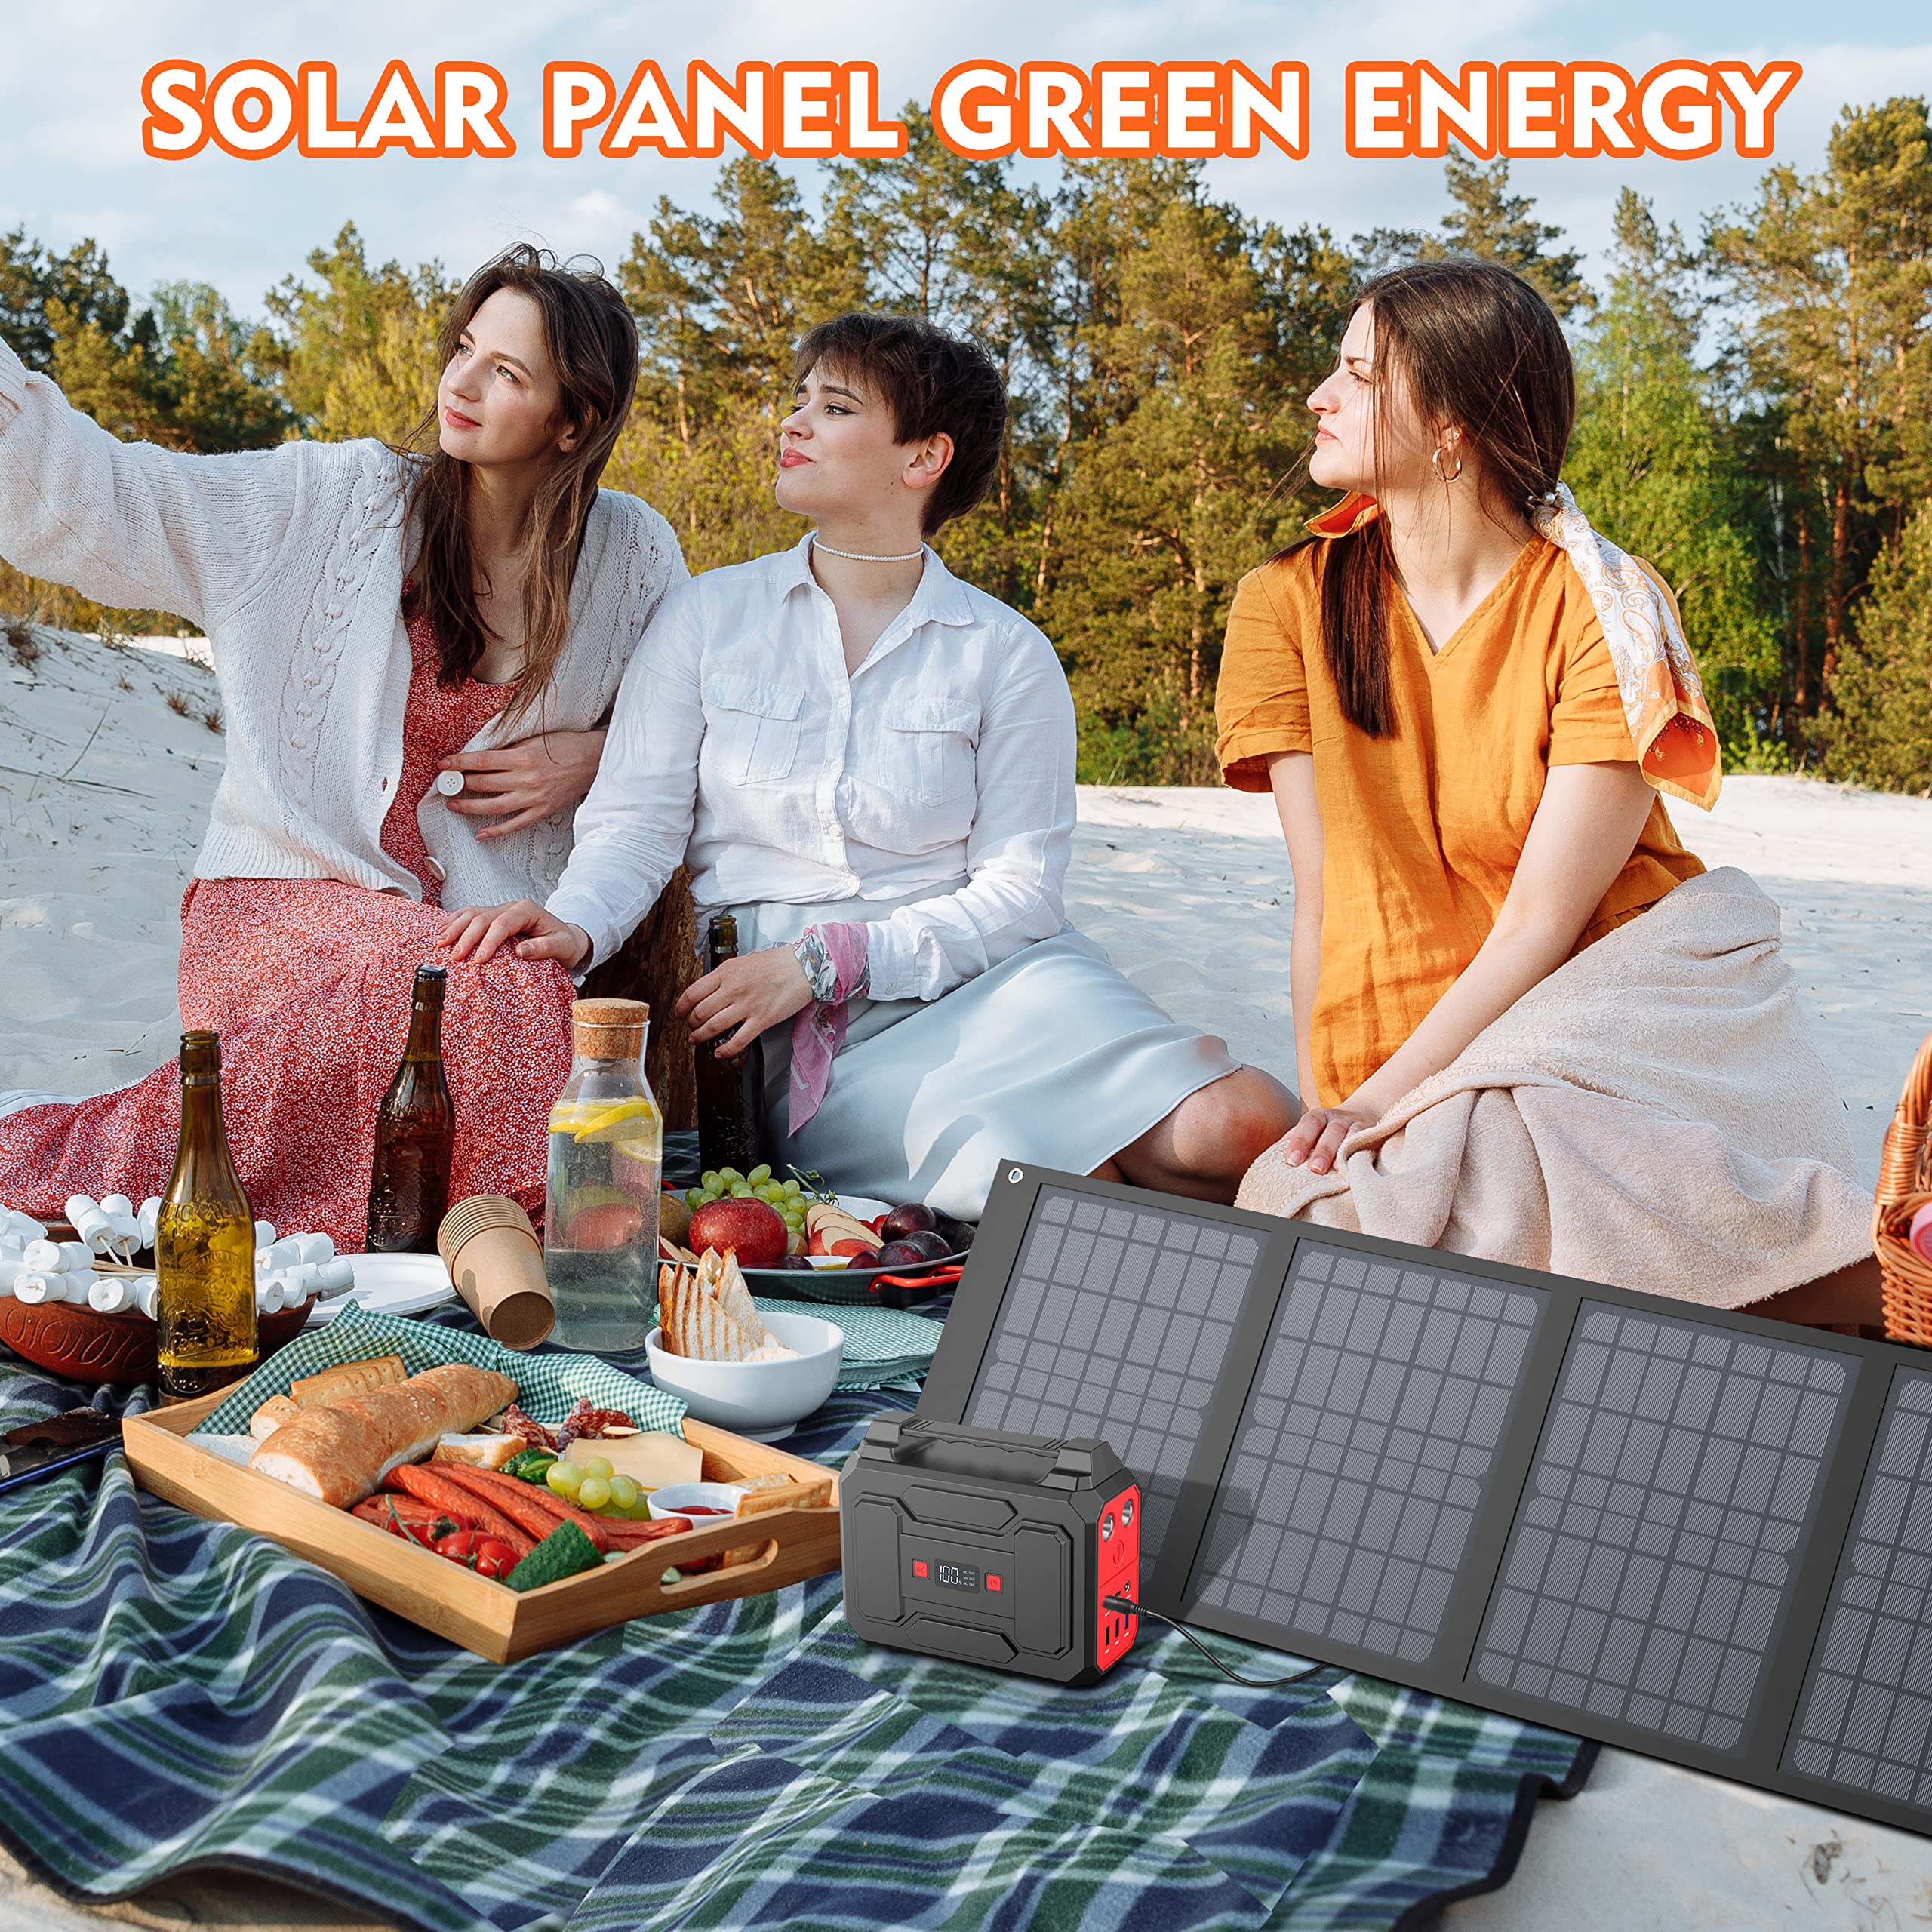 Apowking 100W Portable Power Bank with AC Outlet with 40W Foldable Solar Panel, Portable Laptop Charger for Camping, Home Emergency, Traveling, RV Trip